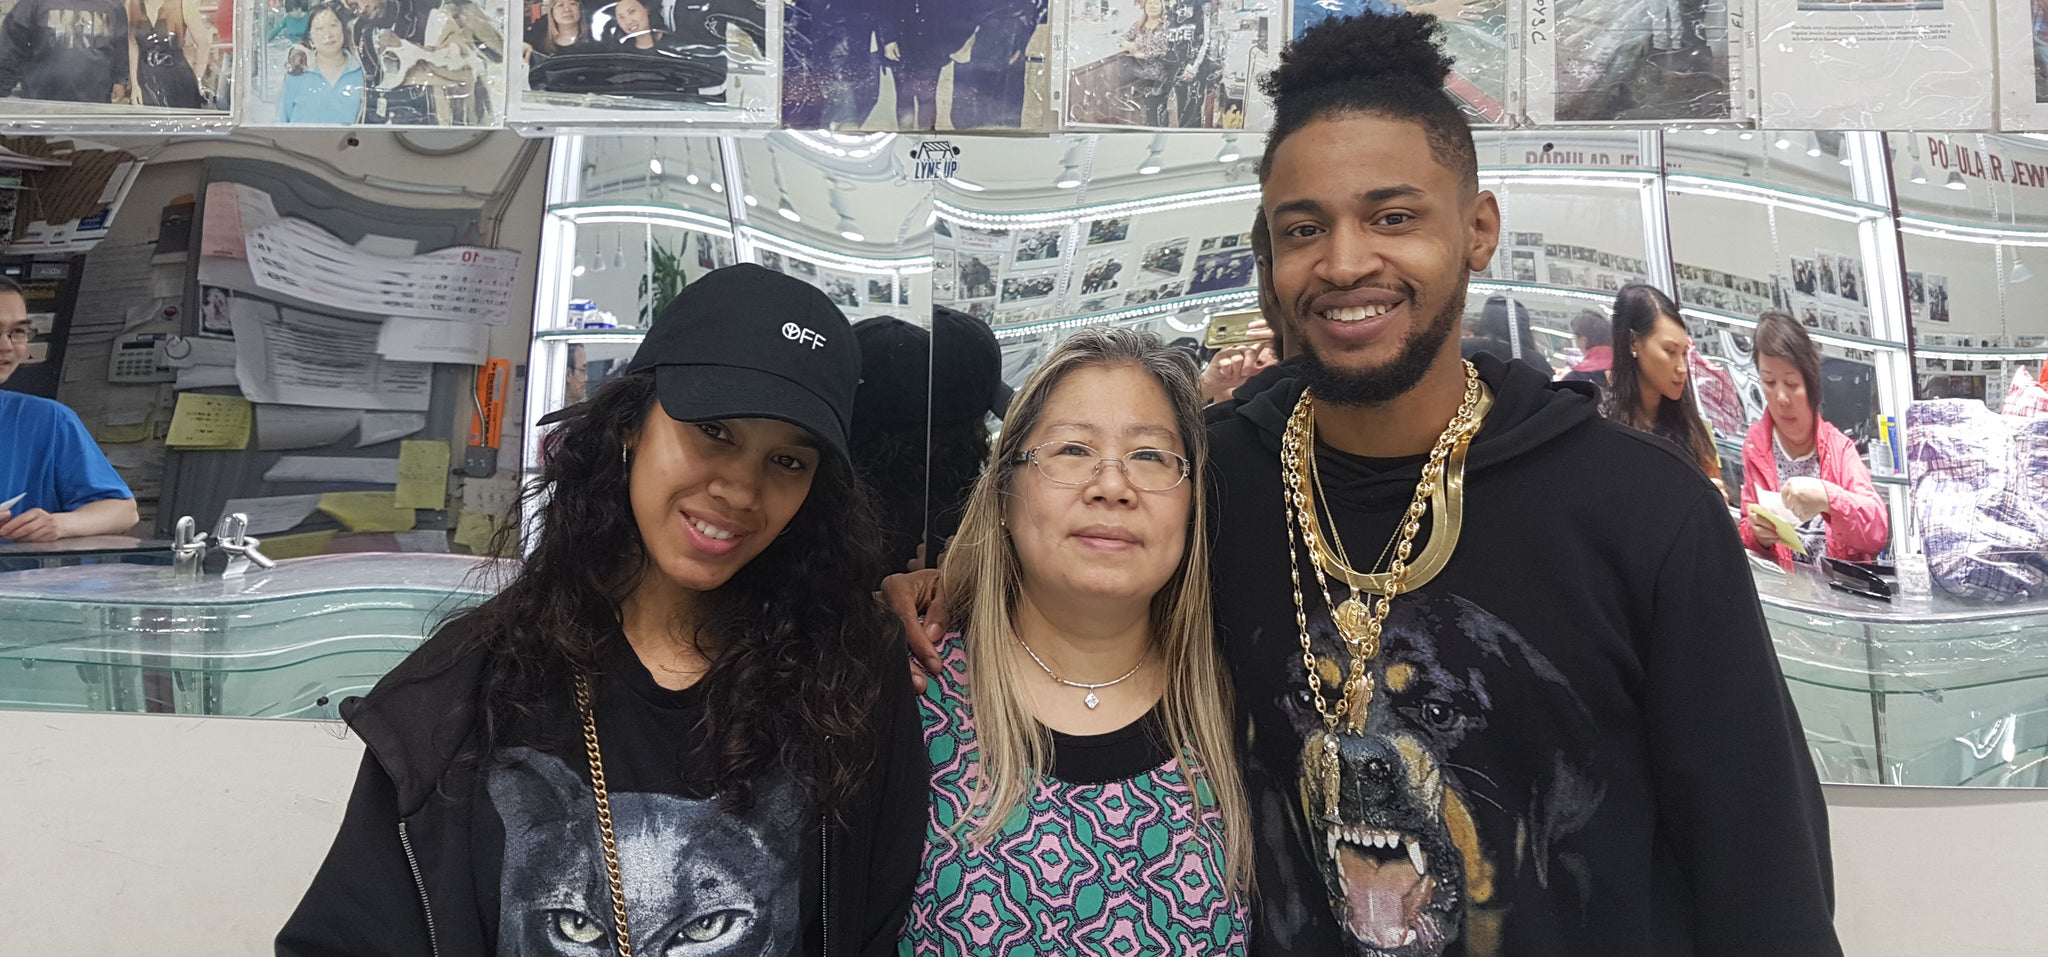 From left to right: Cherish Hicks, Eva from Popular Jewelry, and Grammy award winning, seven time platinum producer Mano who worked on the chart topping track, "The Hills" in The Weeknd's album, "Beauty Behind the Madness" are posing together